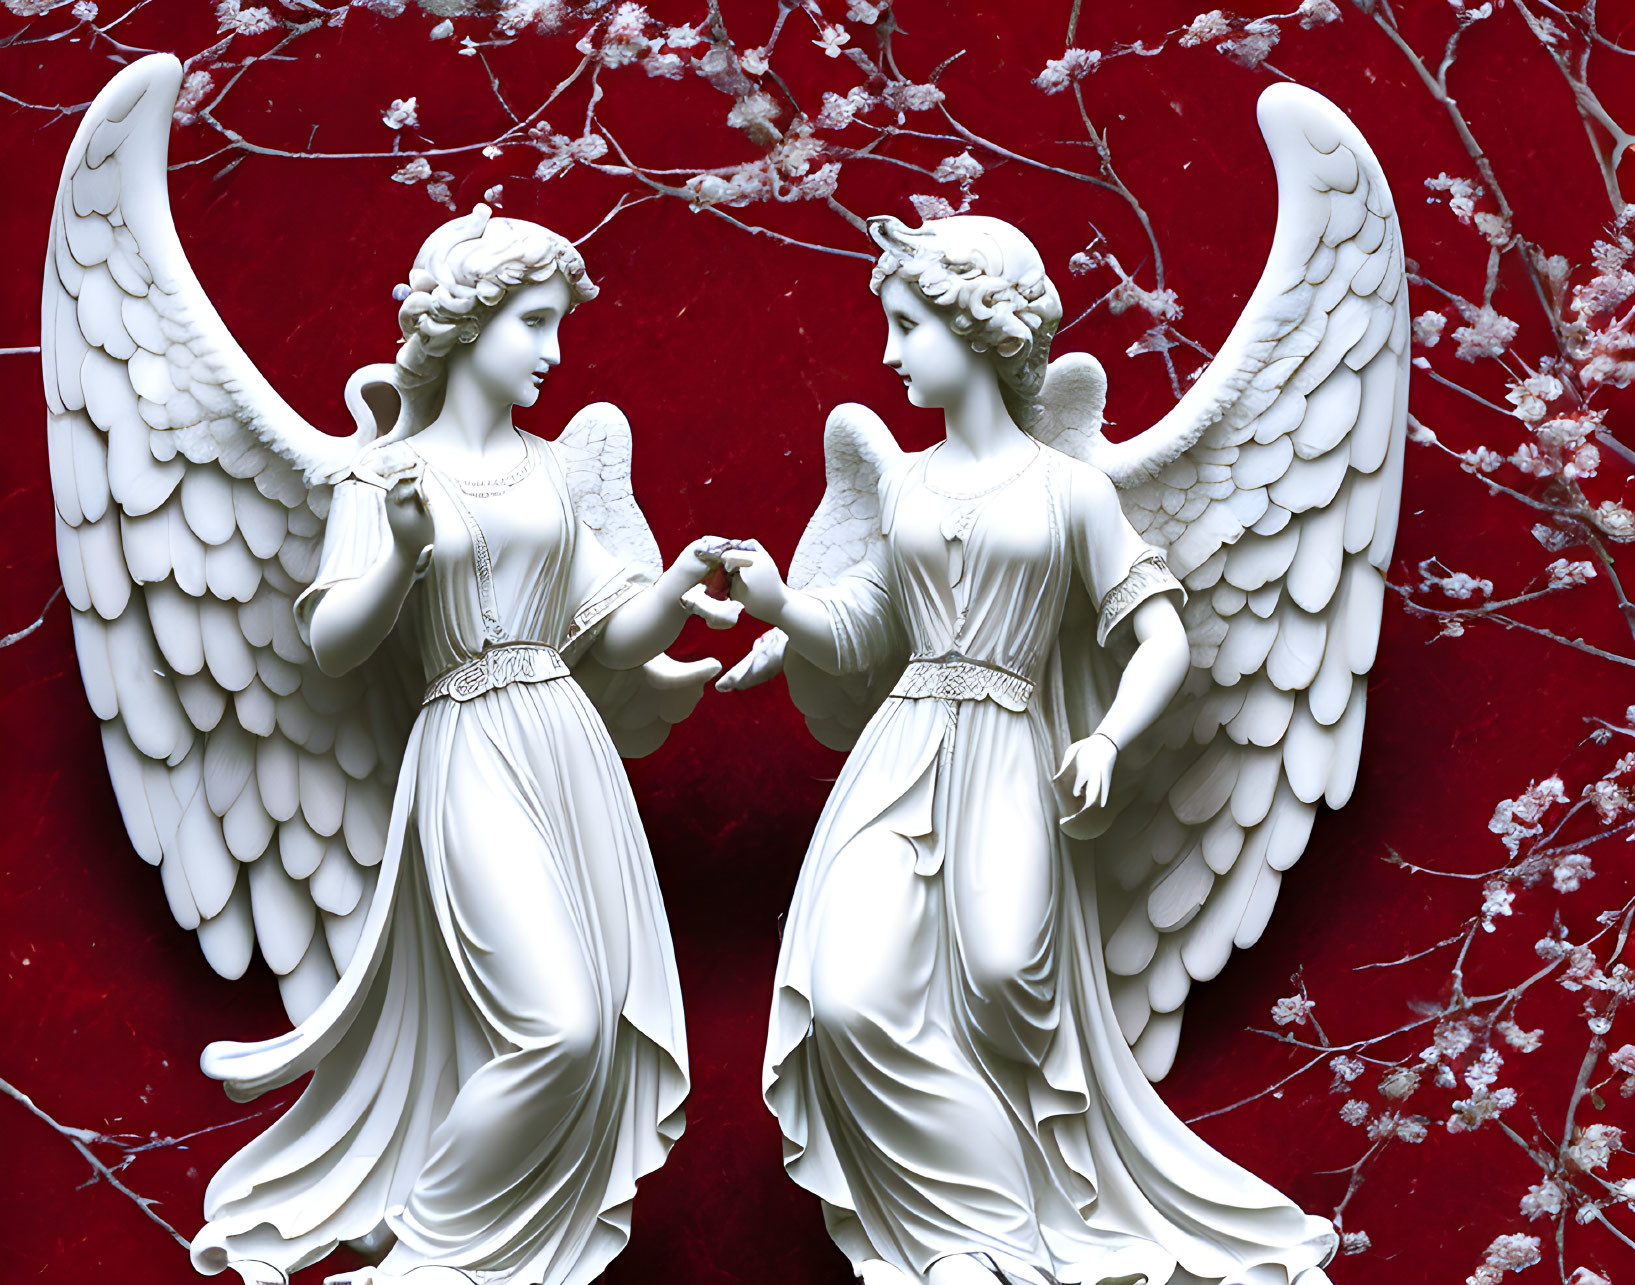 White Angel Statues Holding Hands on Red Background with White Branches